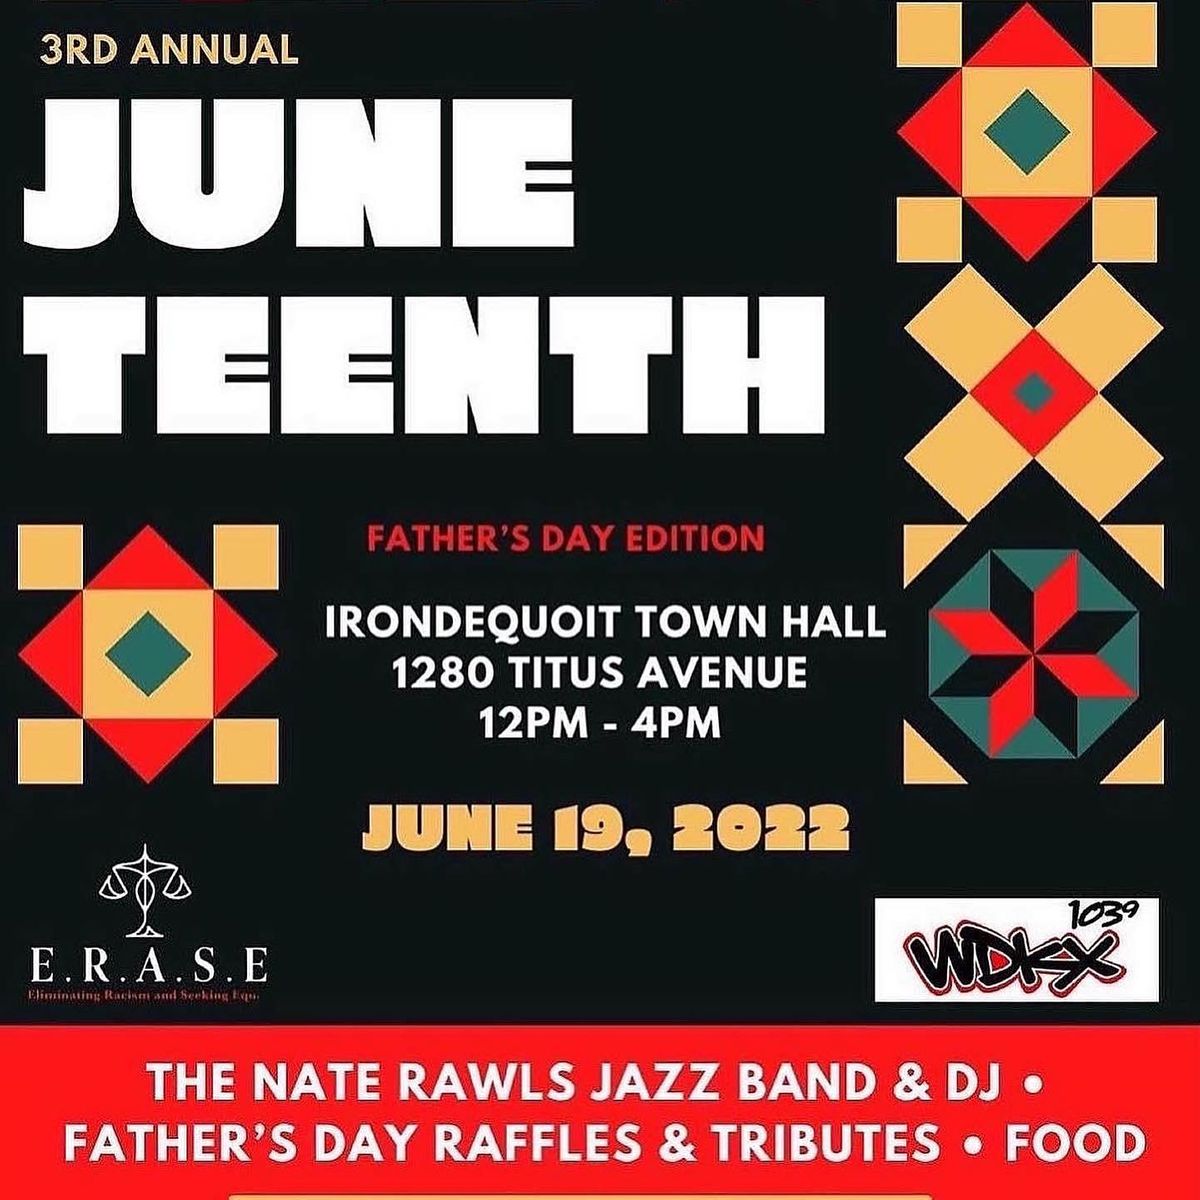 E.R.A.S.E 3rd Annual Event Irondequoit Town Hall